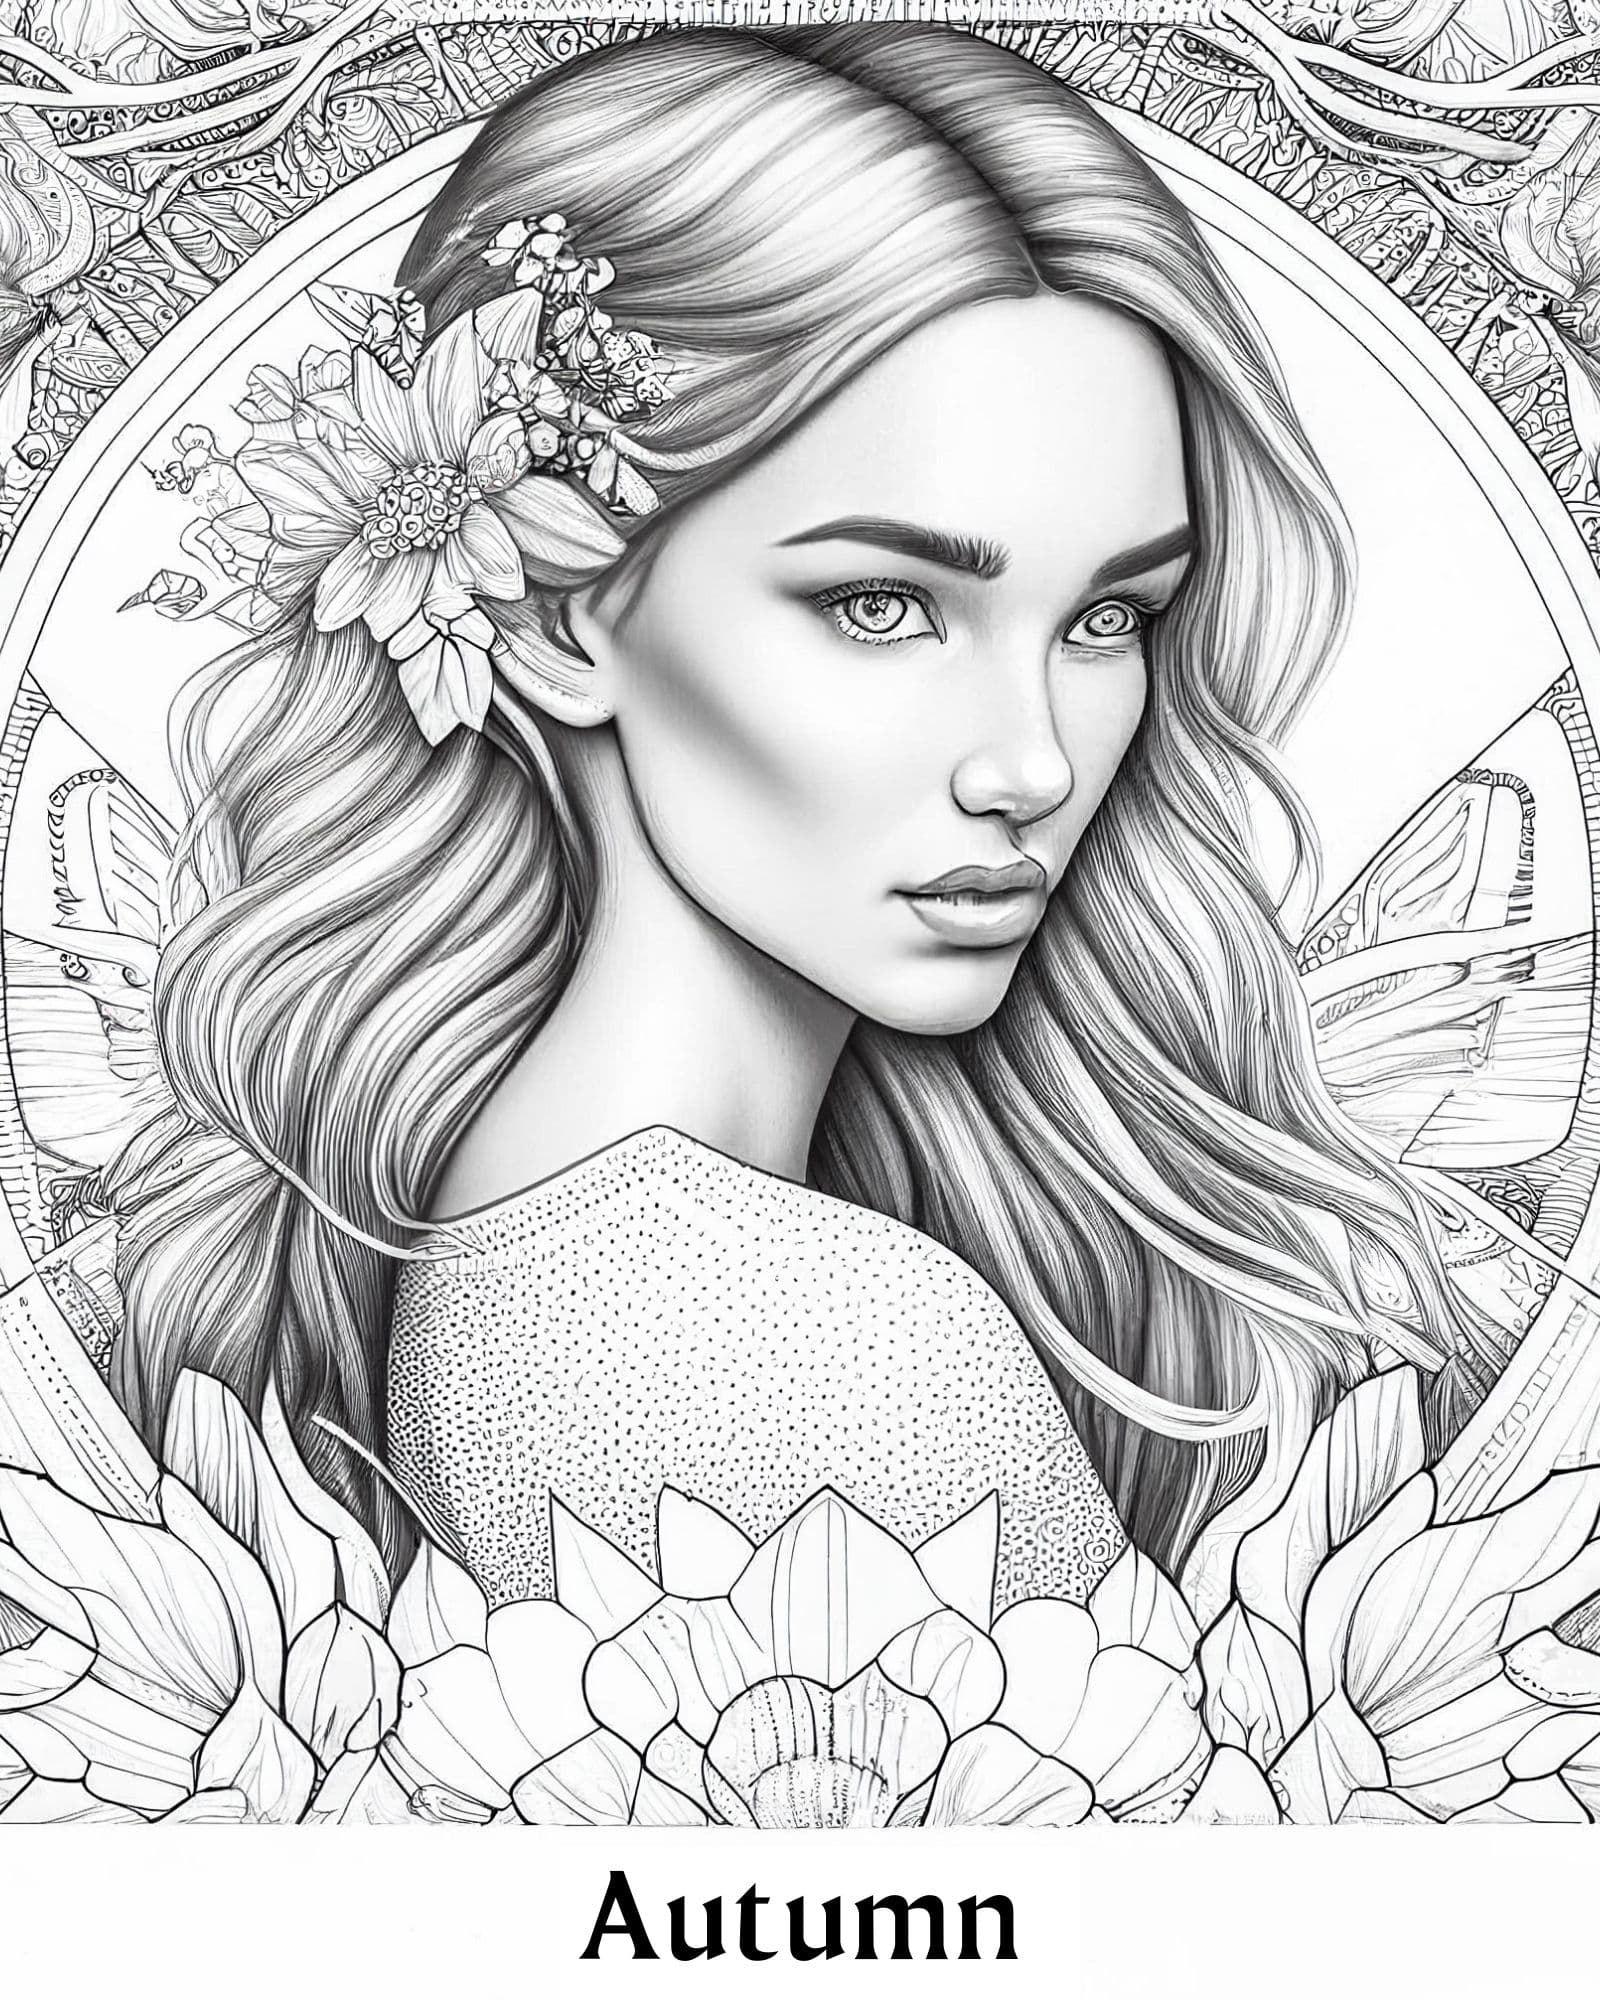 https://www.ourmindfullife.com/wp-content/uploads/2023/03/Fairy-of-autumn-adult-coloring-page-full-size.jpg